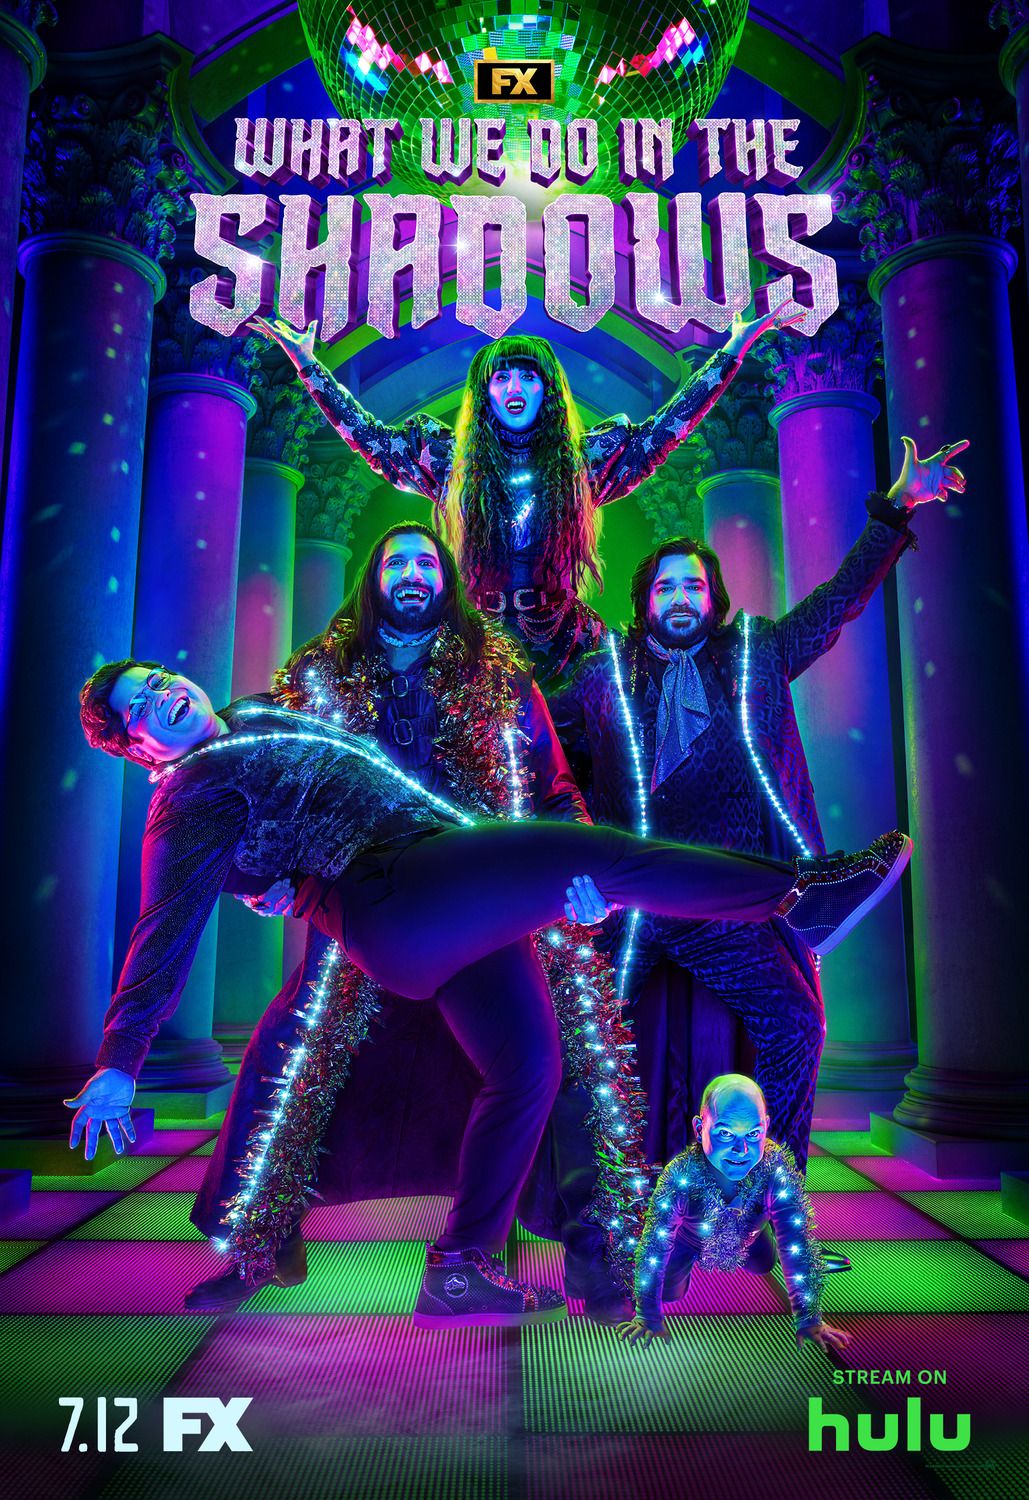 Poster for the TV show “What We Do in the Shadows”